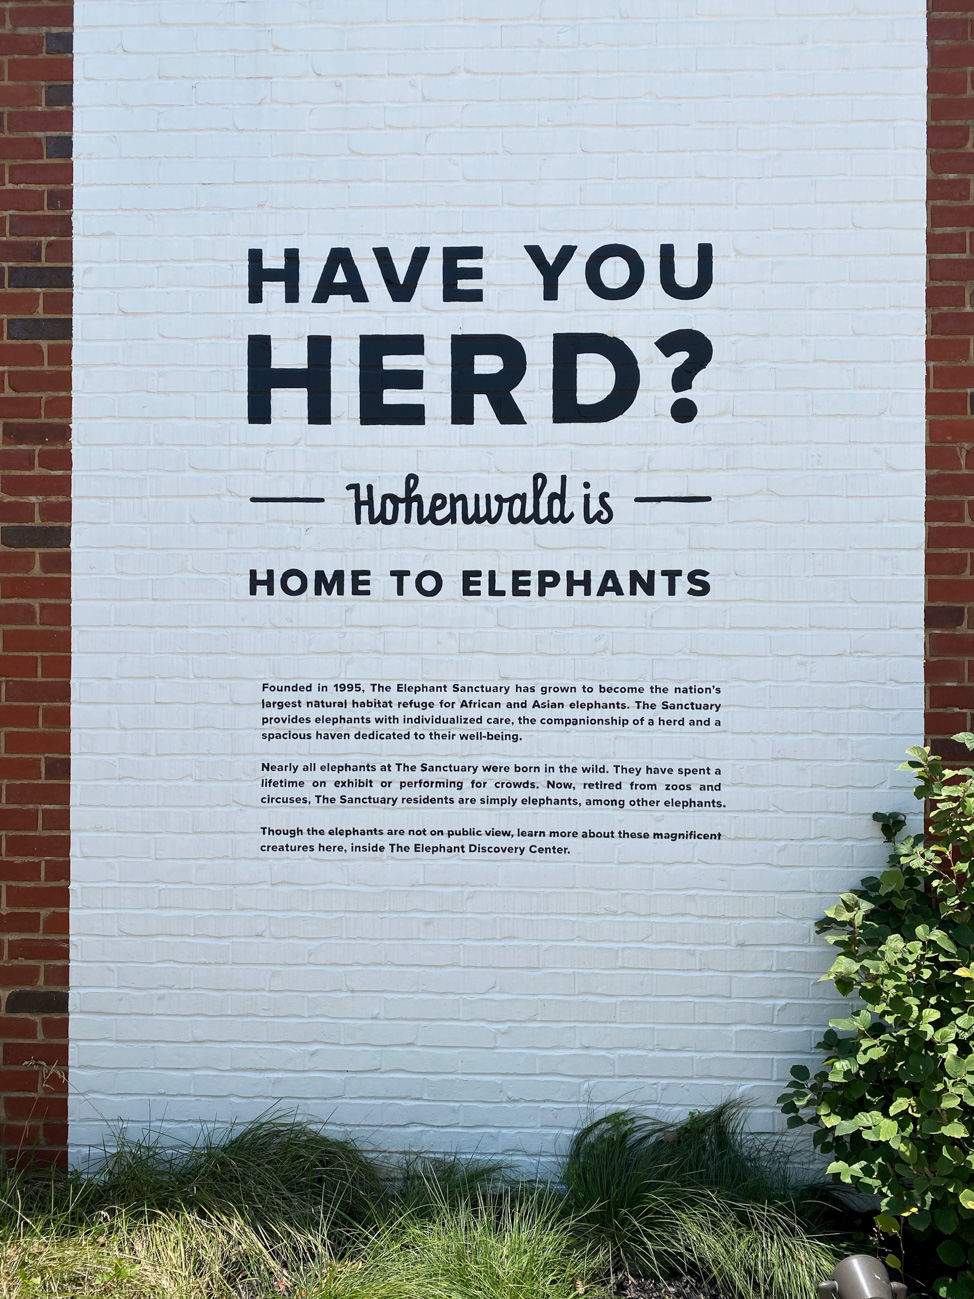 Elephant Sanctuary in Hohenwald, Tennessee